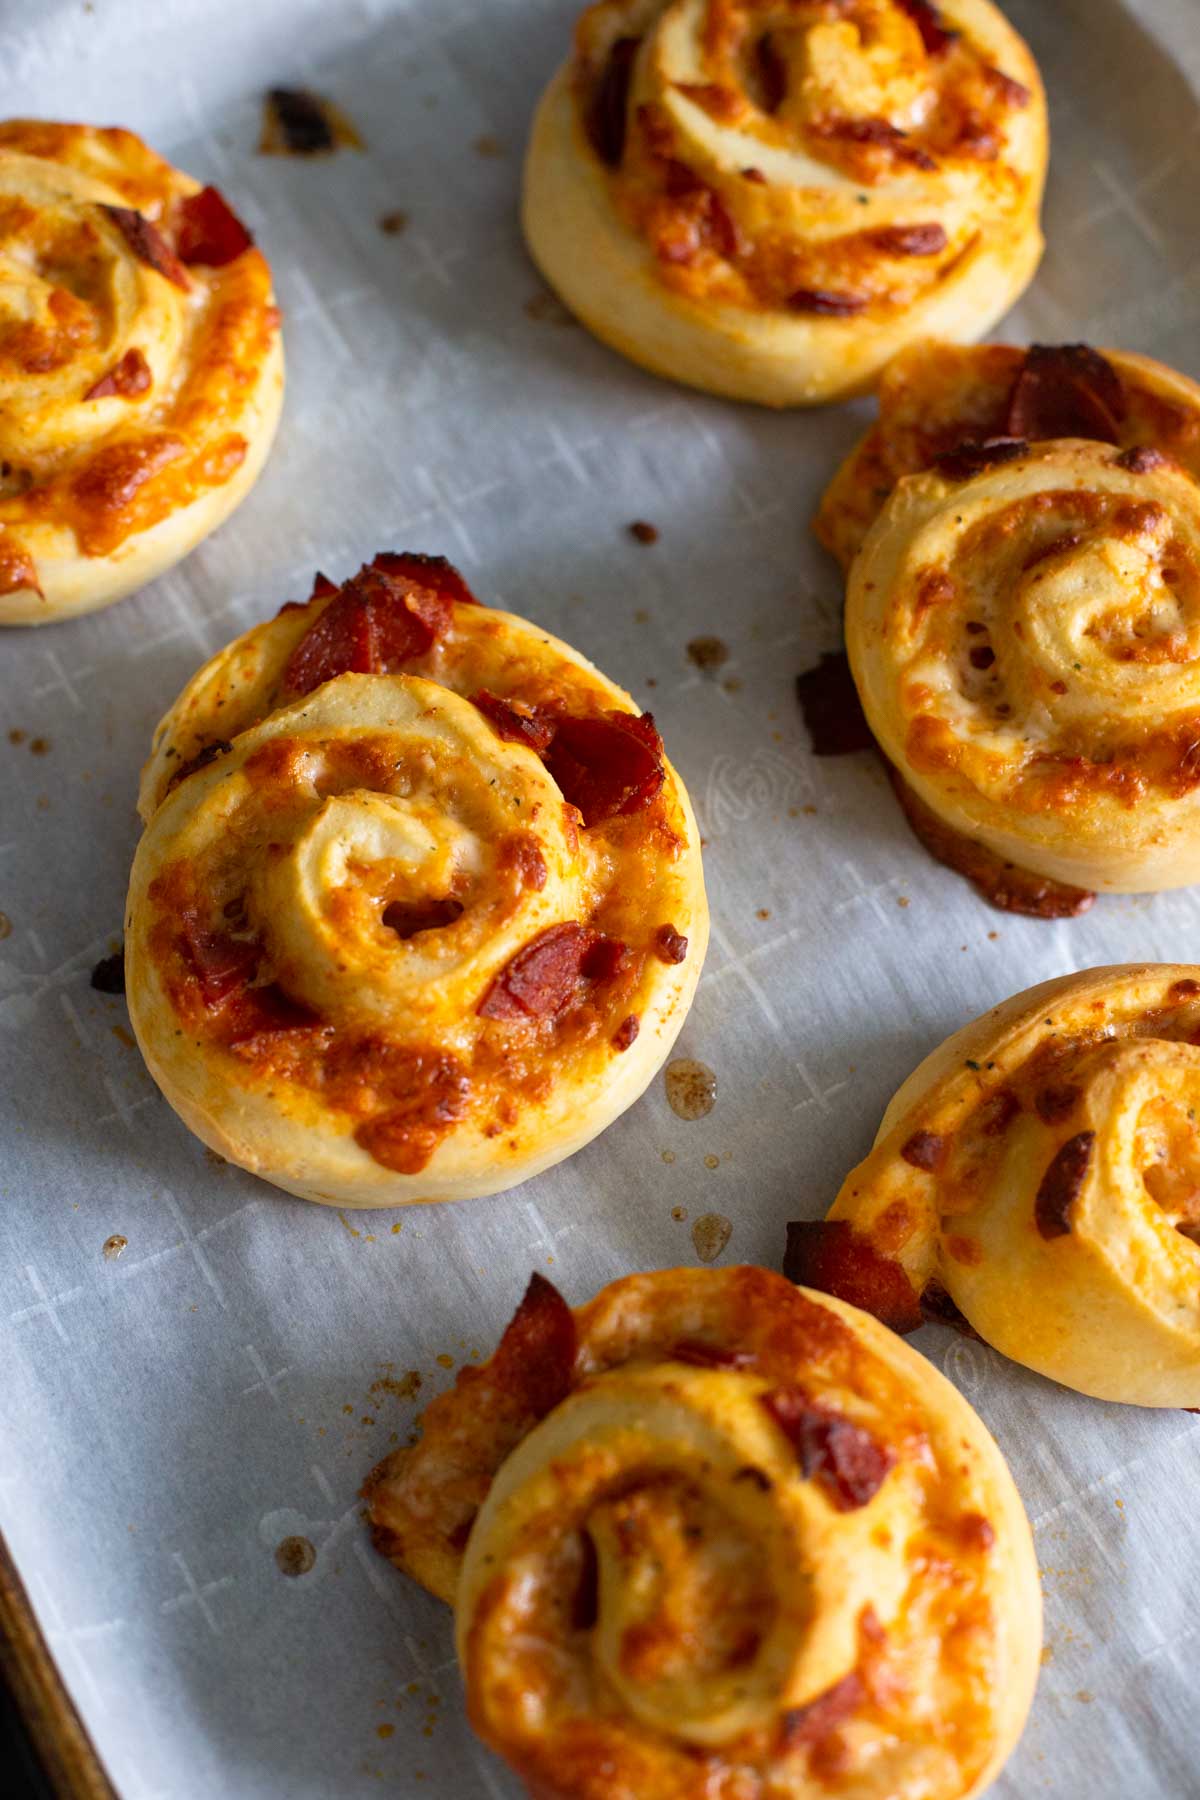 The pizza buns are golden brown and crispy looking.